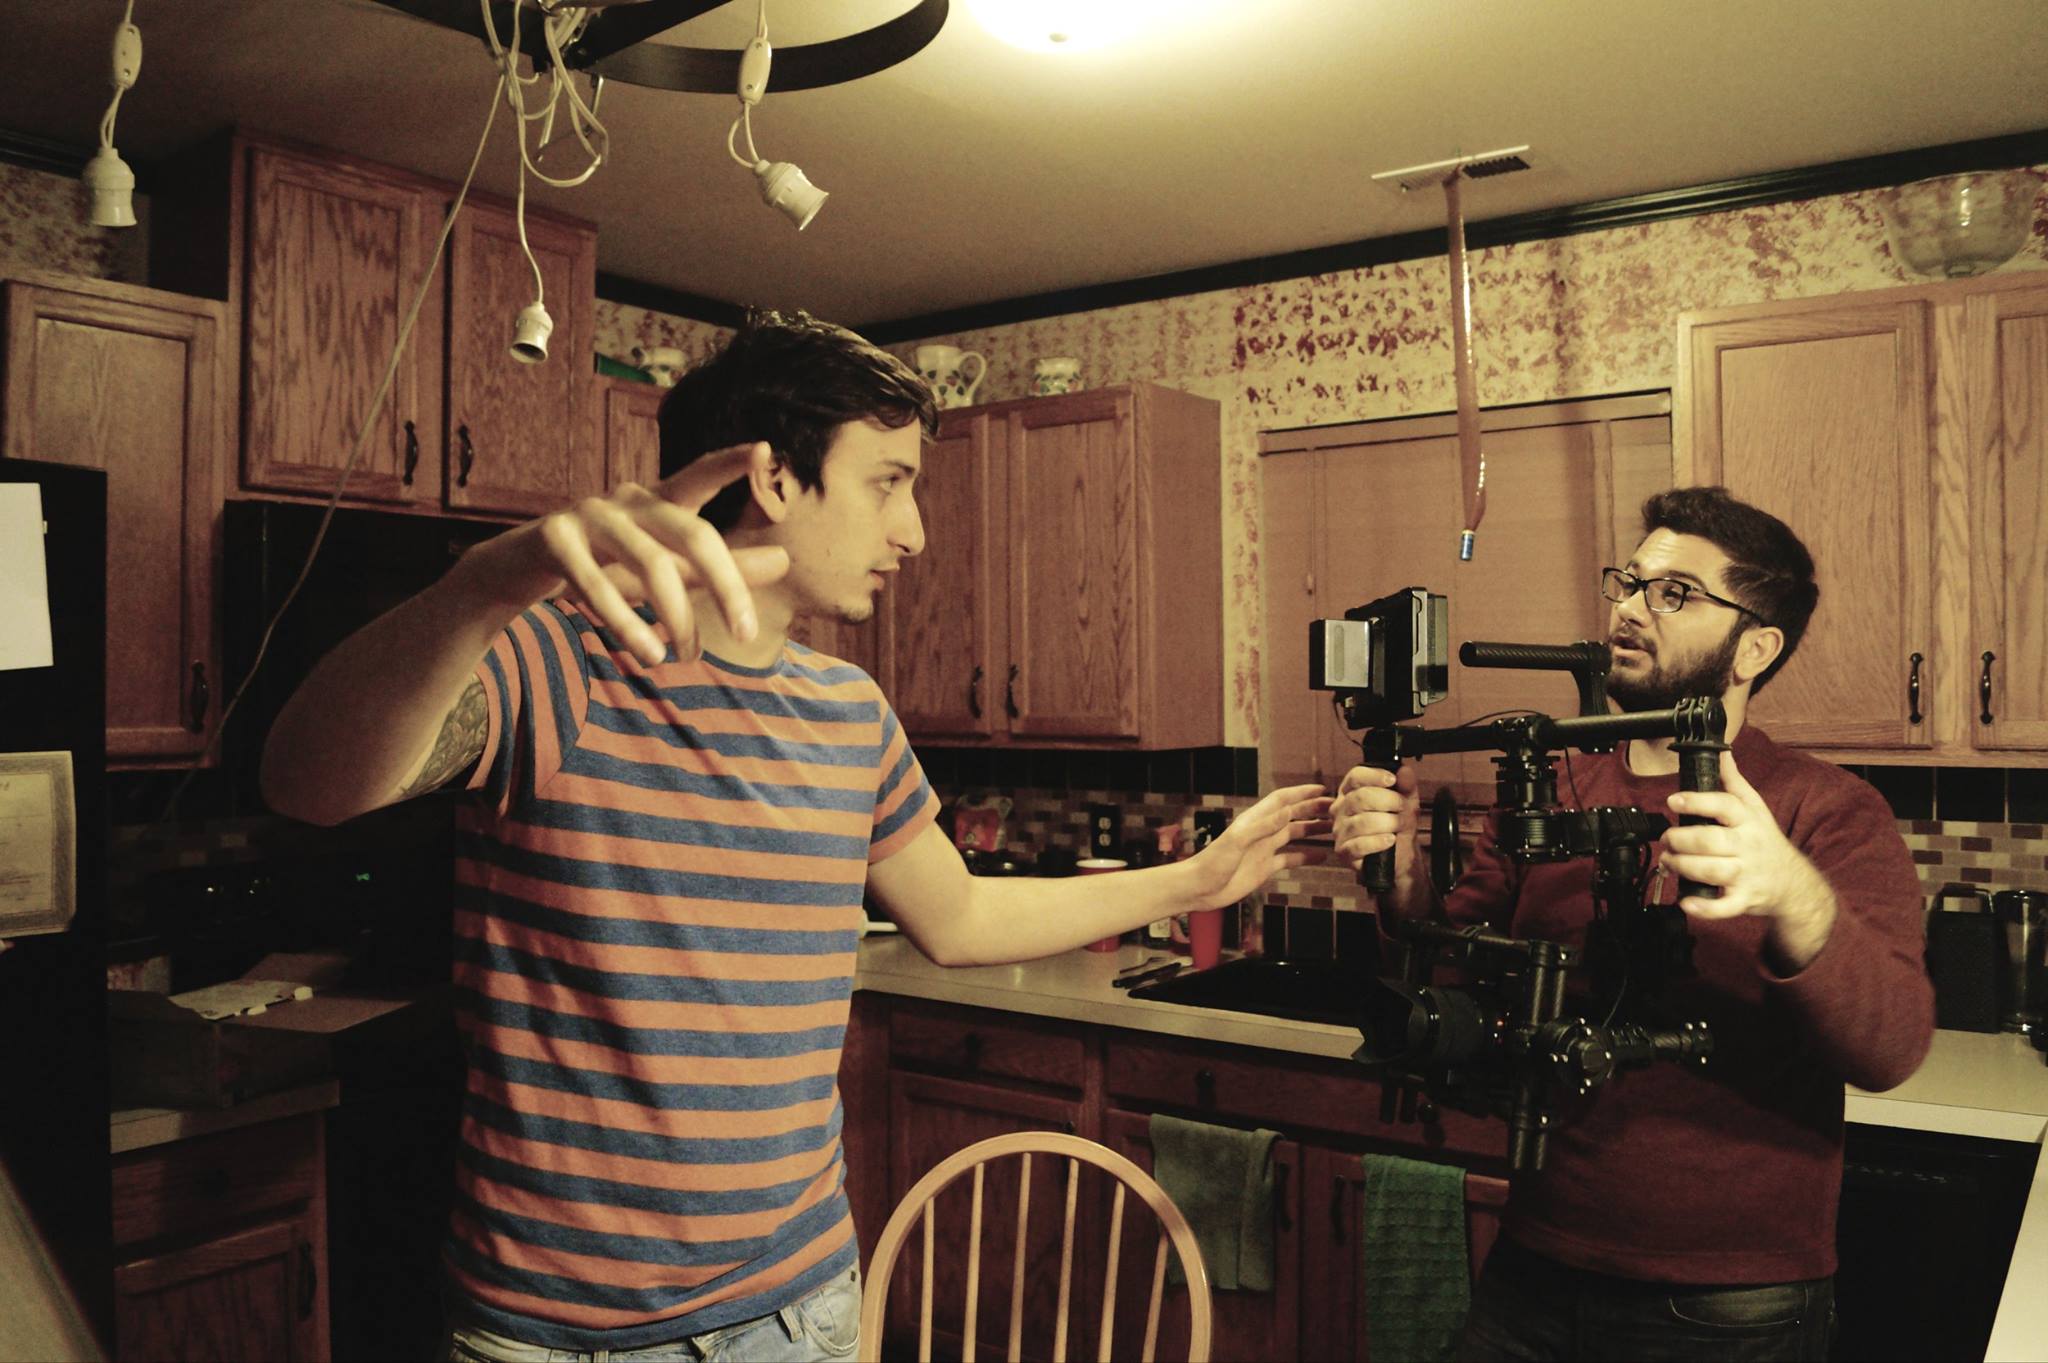 Director and DoP